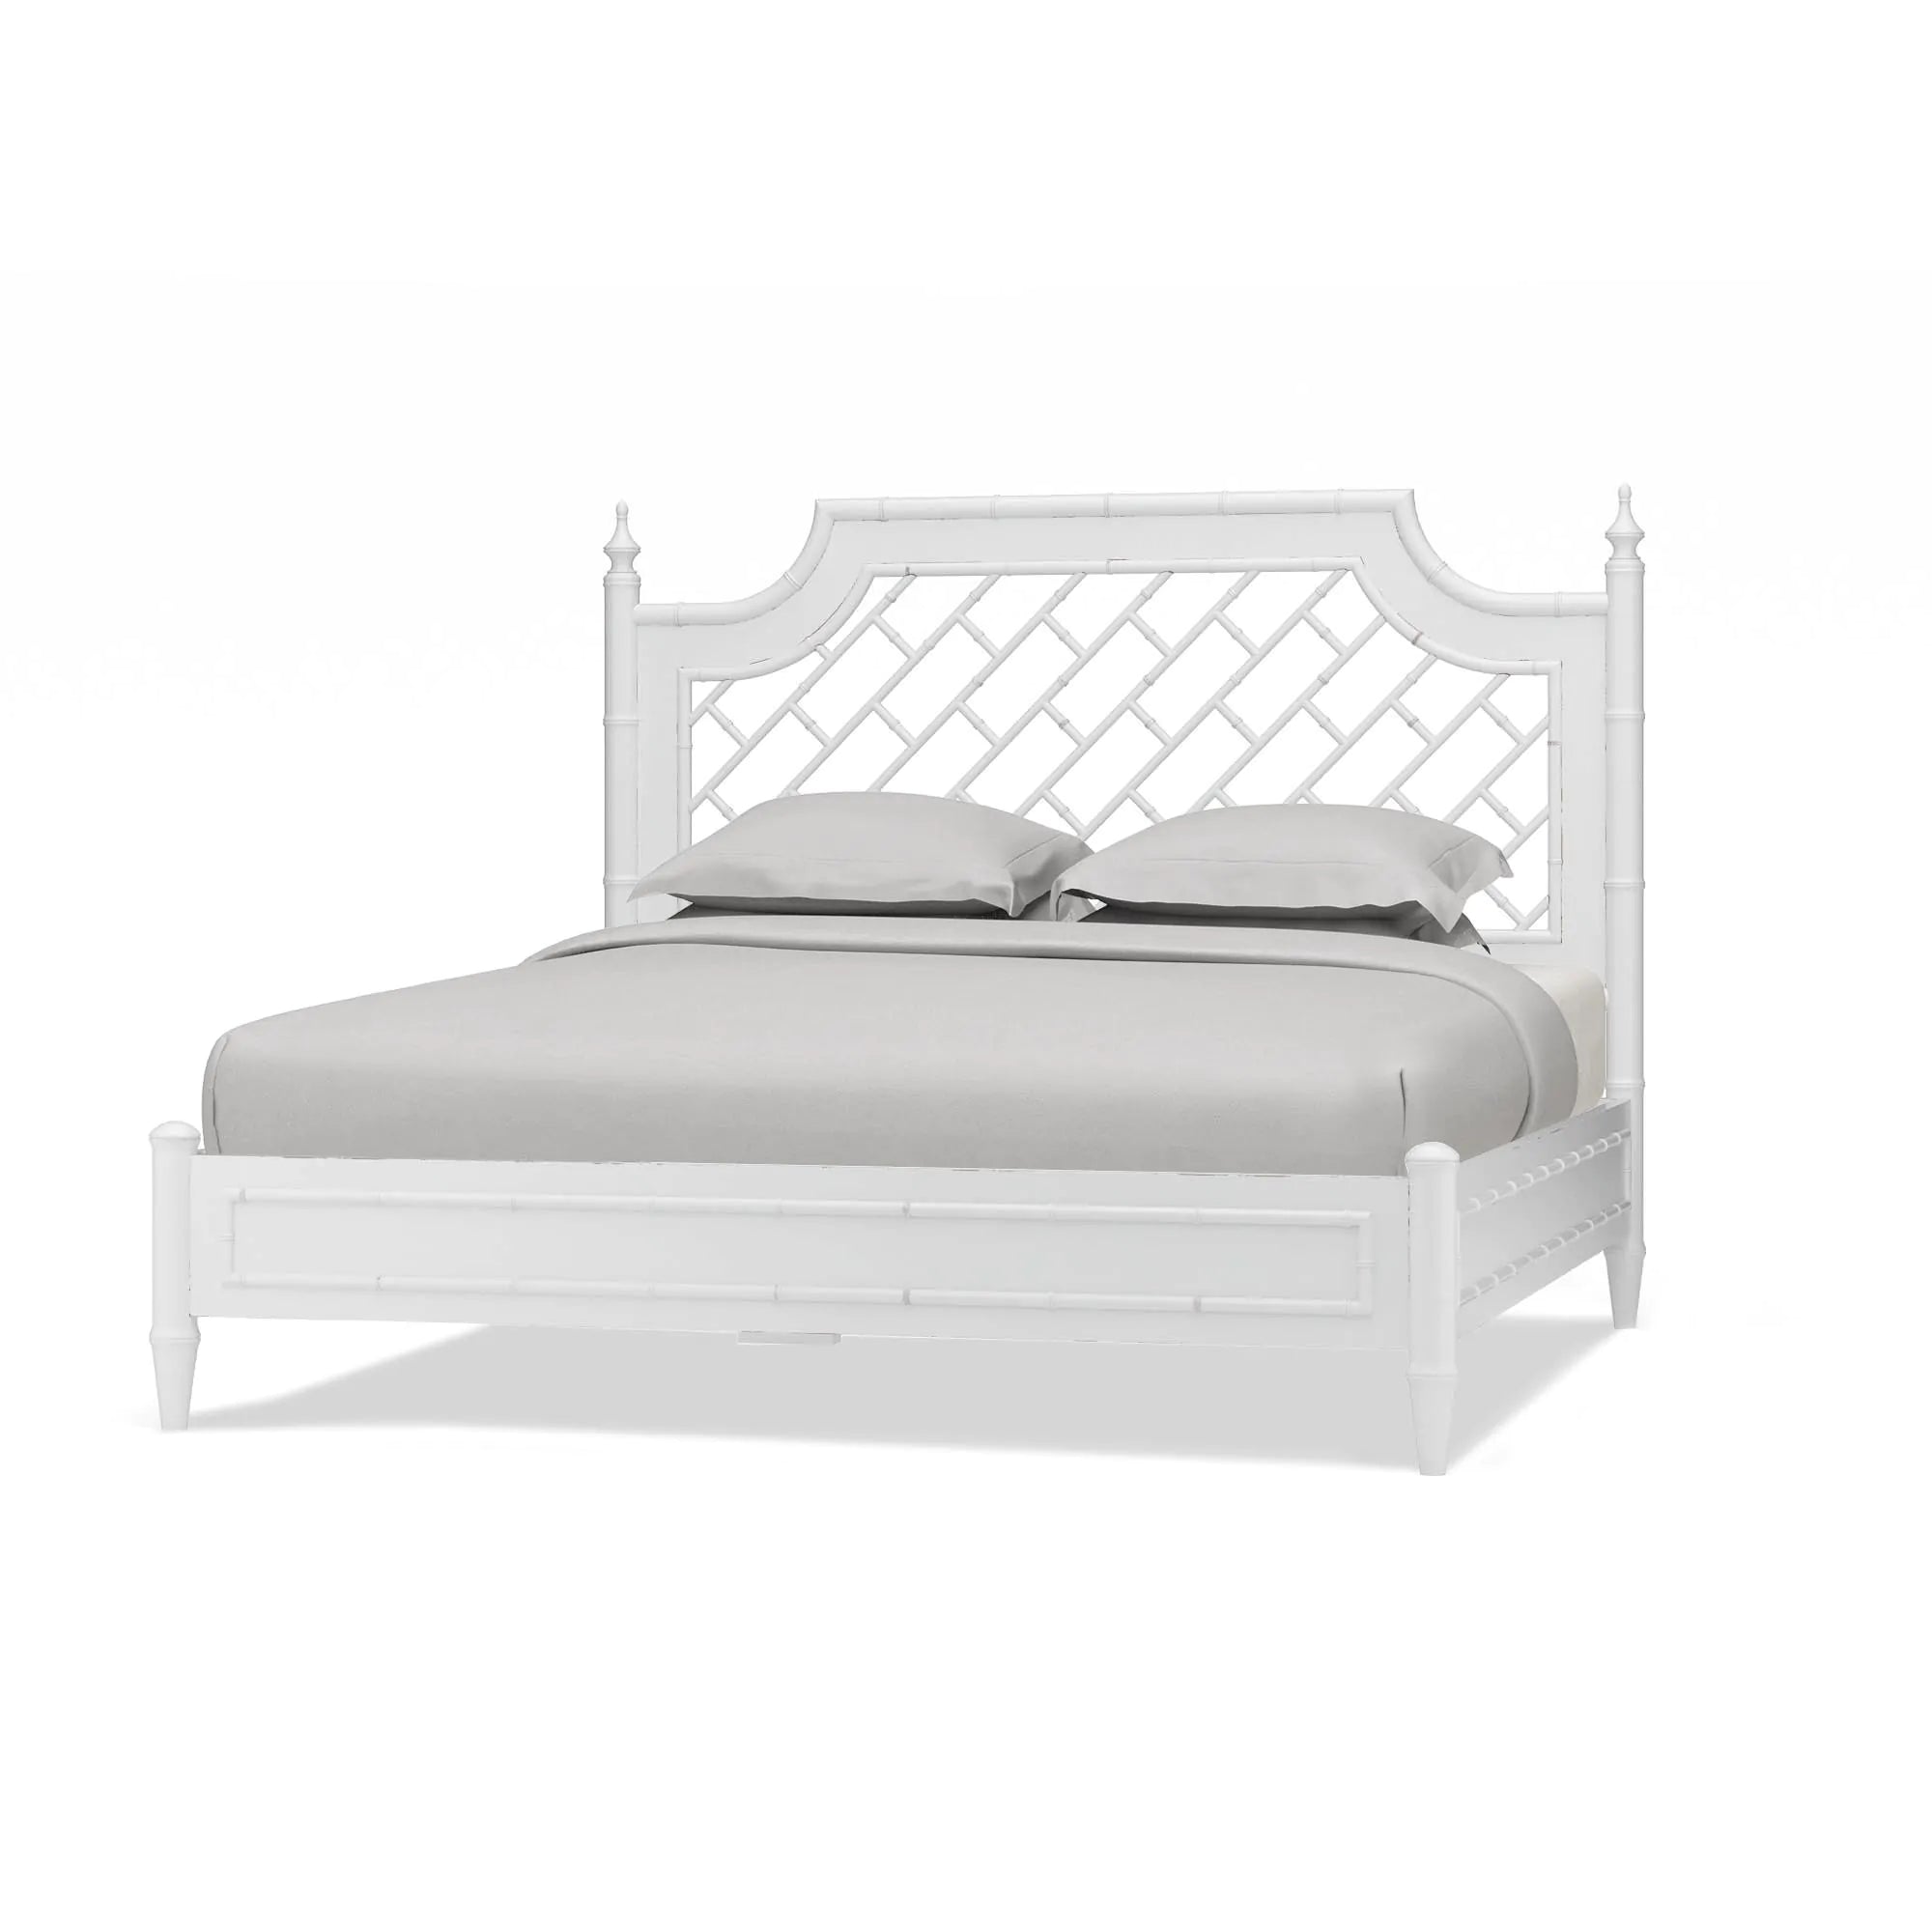 Chelsea Bed King Architectural White, Light Distressed